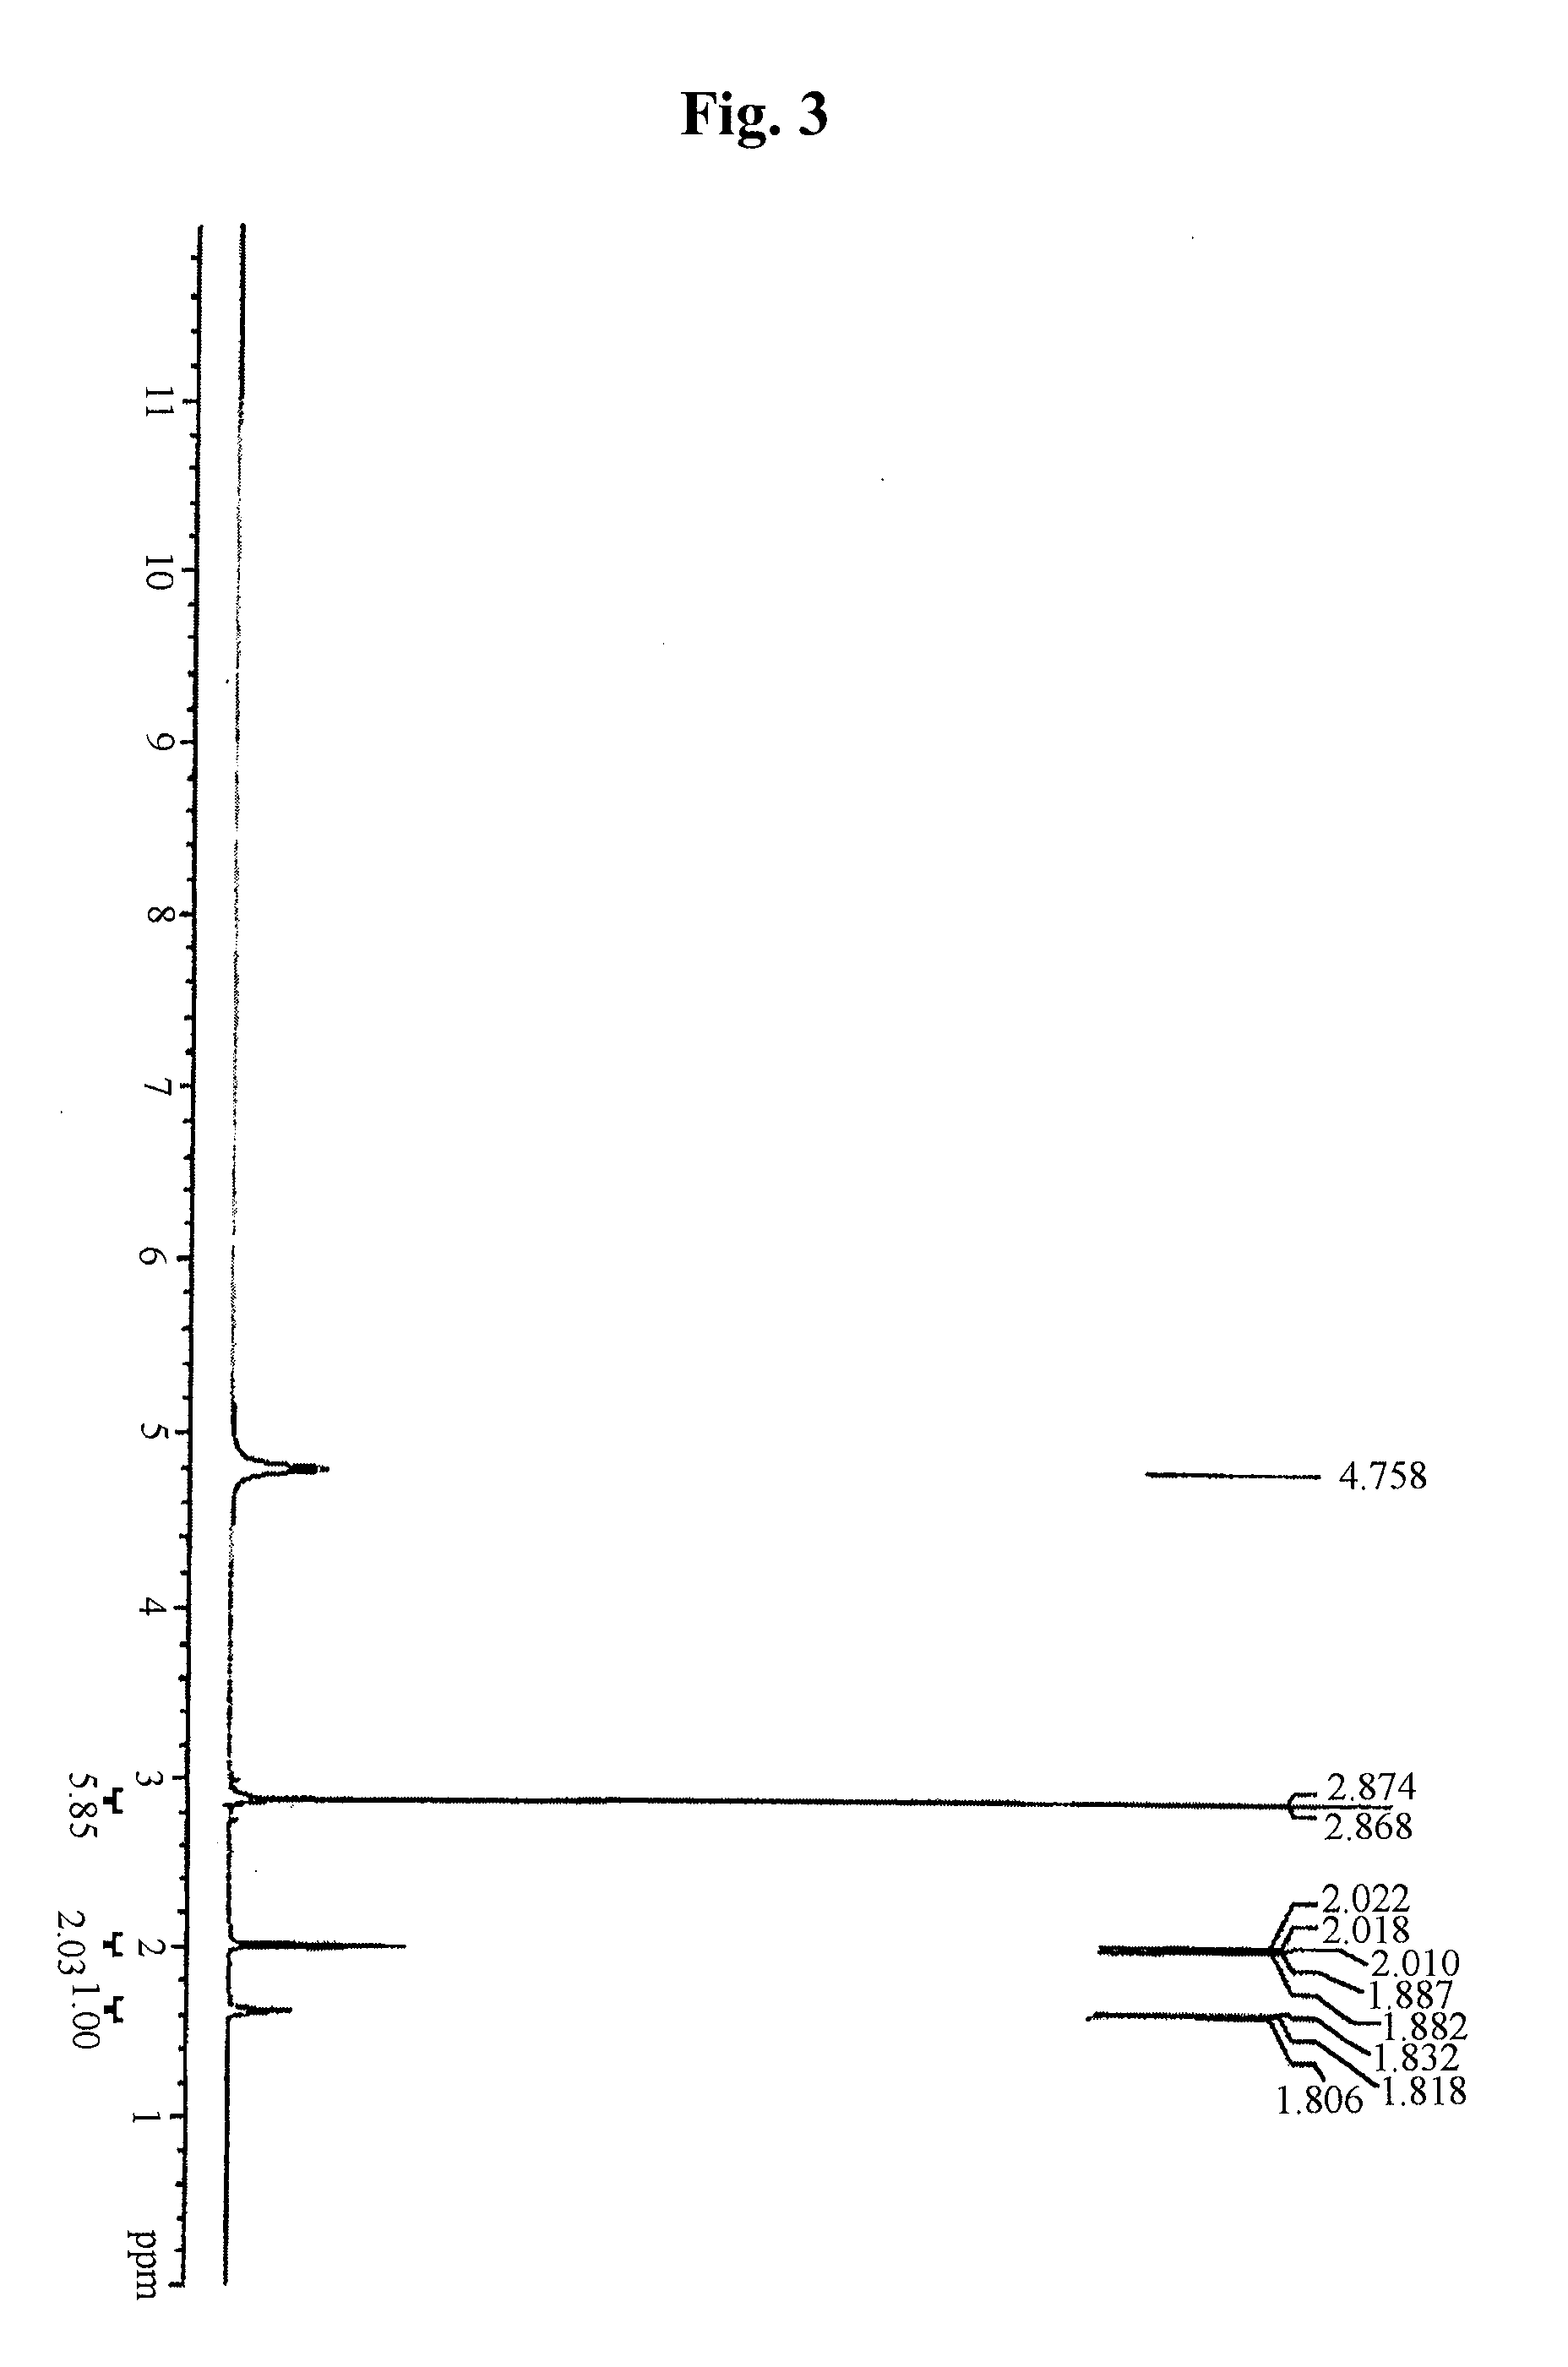 N,n-dimethyl imidodicarbonimidic diamide dicarboxylate, method for producing the same and pharmaceutical compositions comprising the same